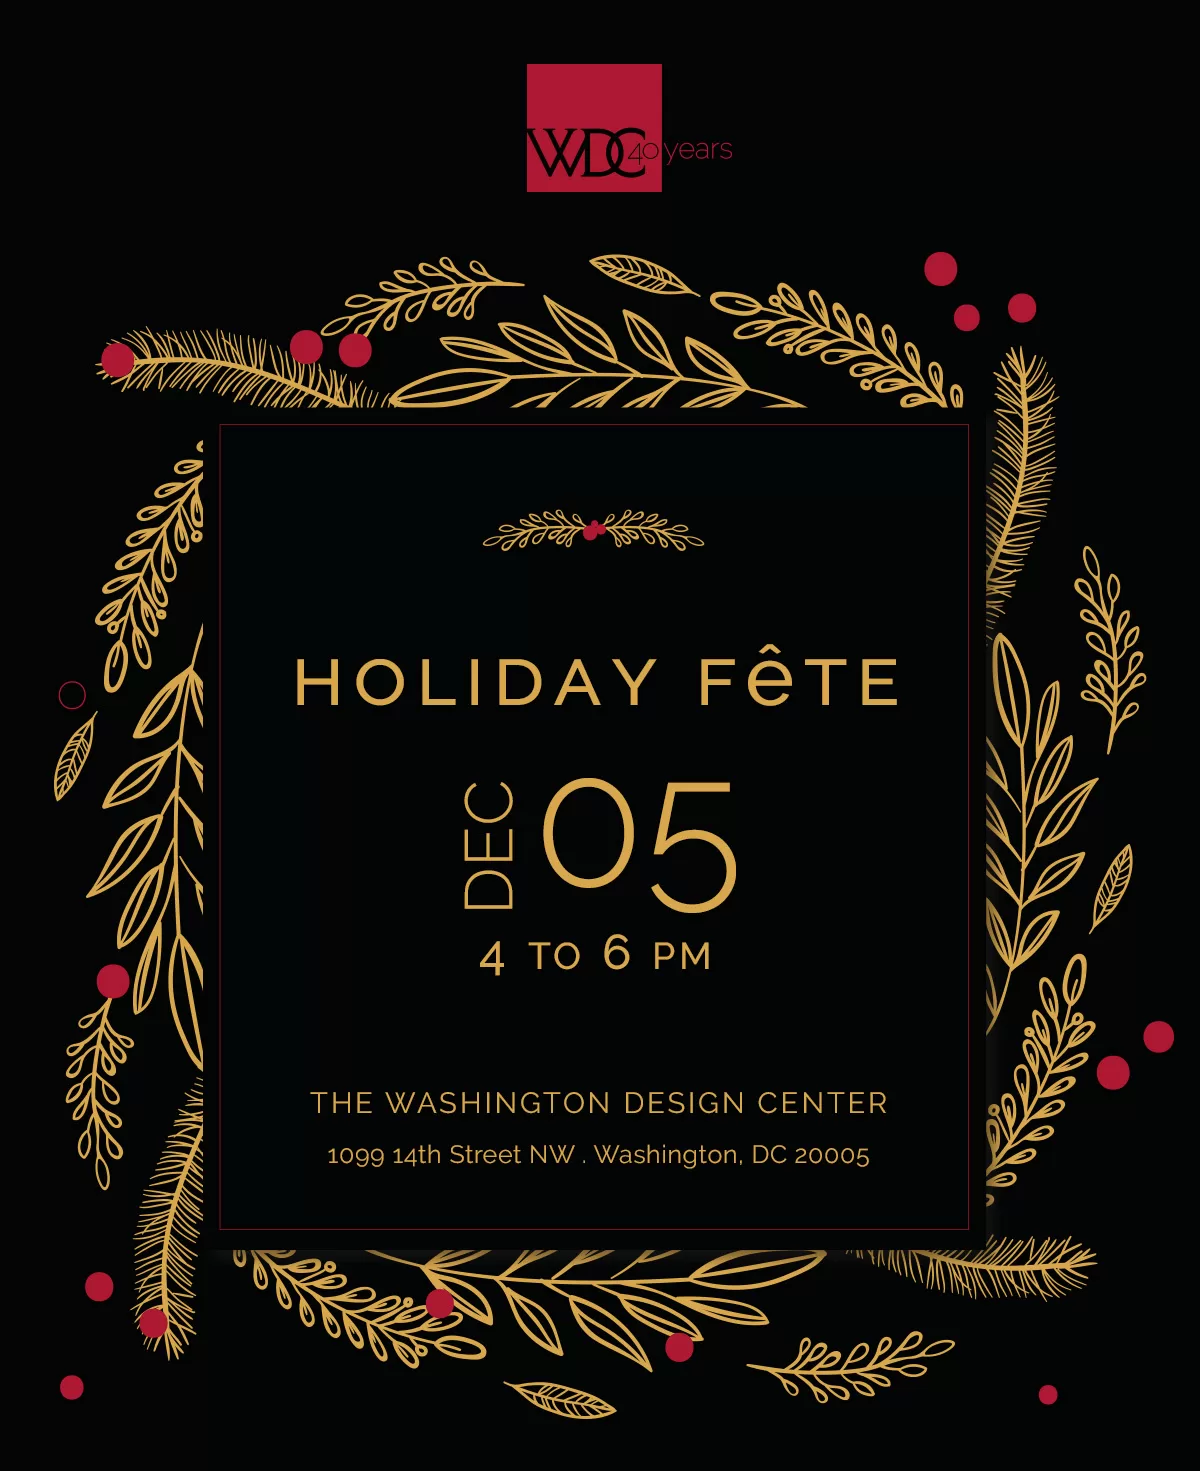 WDC Annual Holiday Fête. December 5, 4-6PM